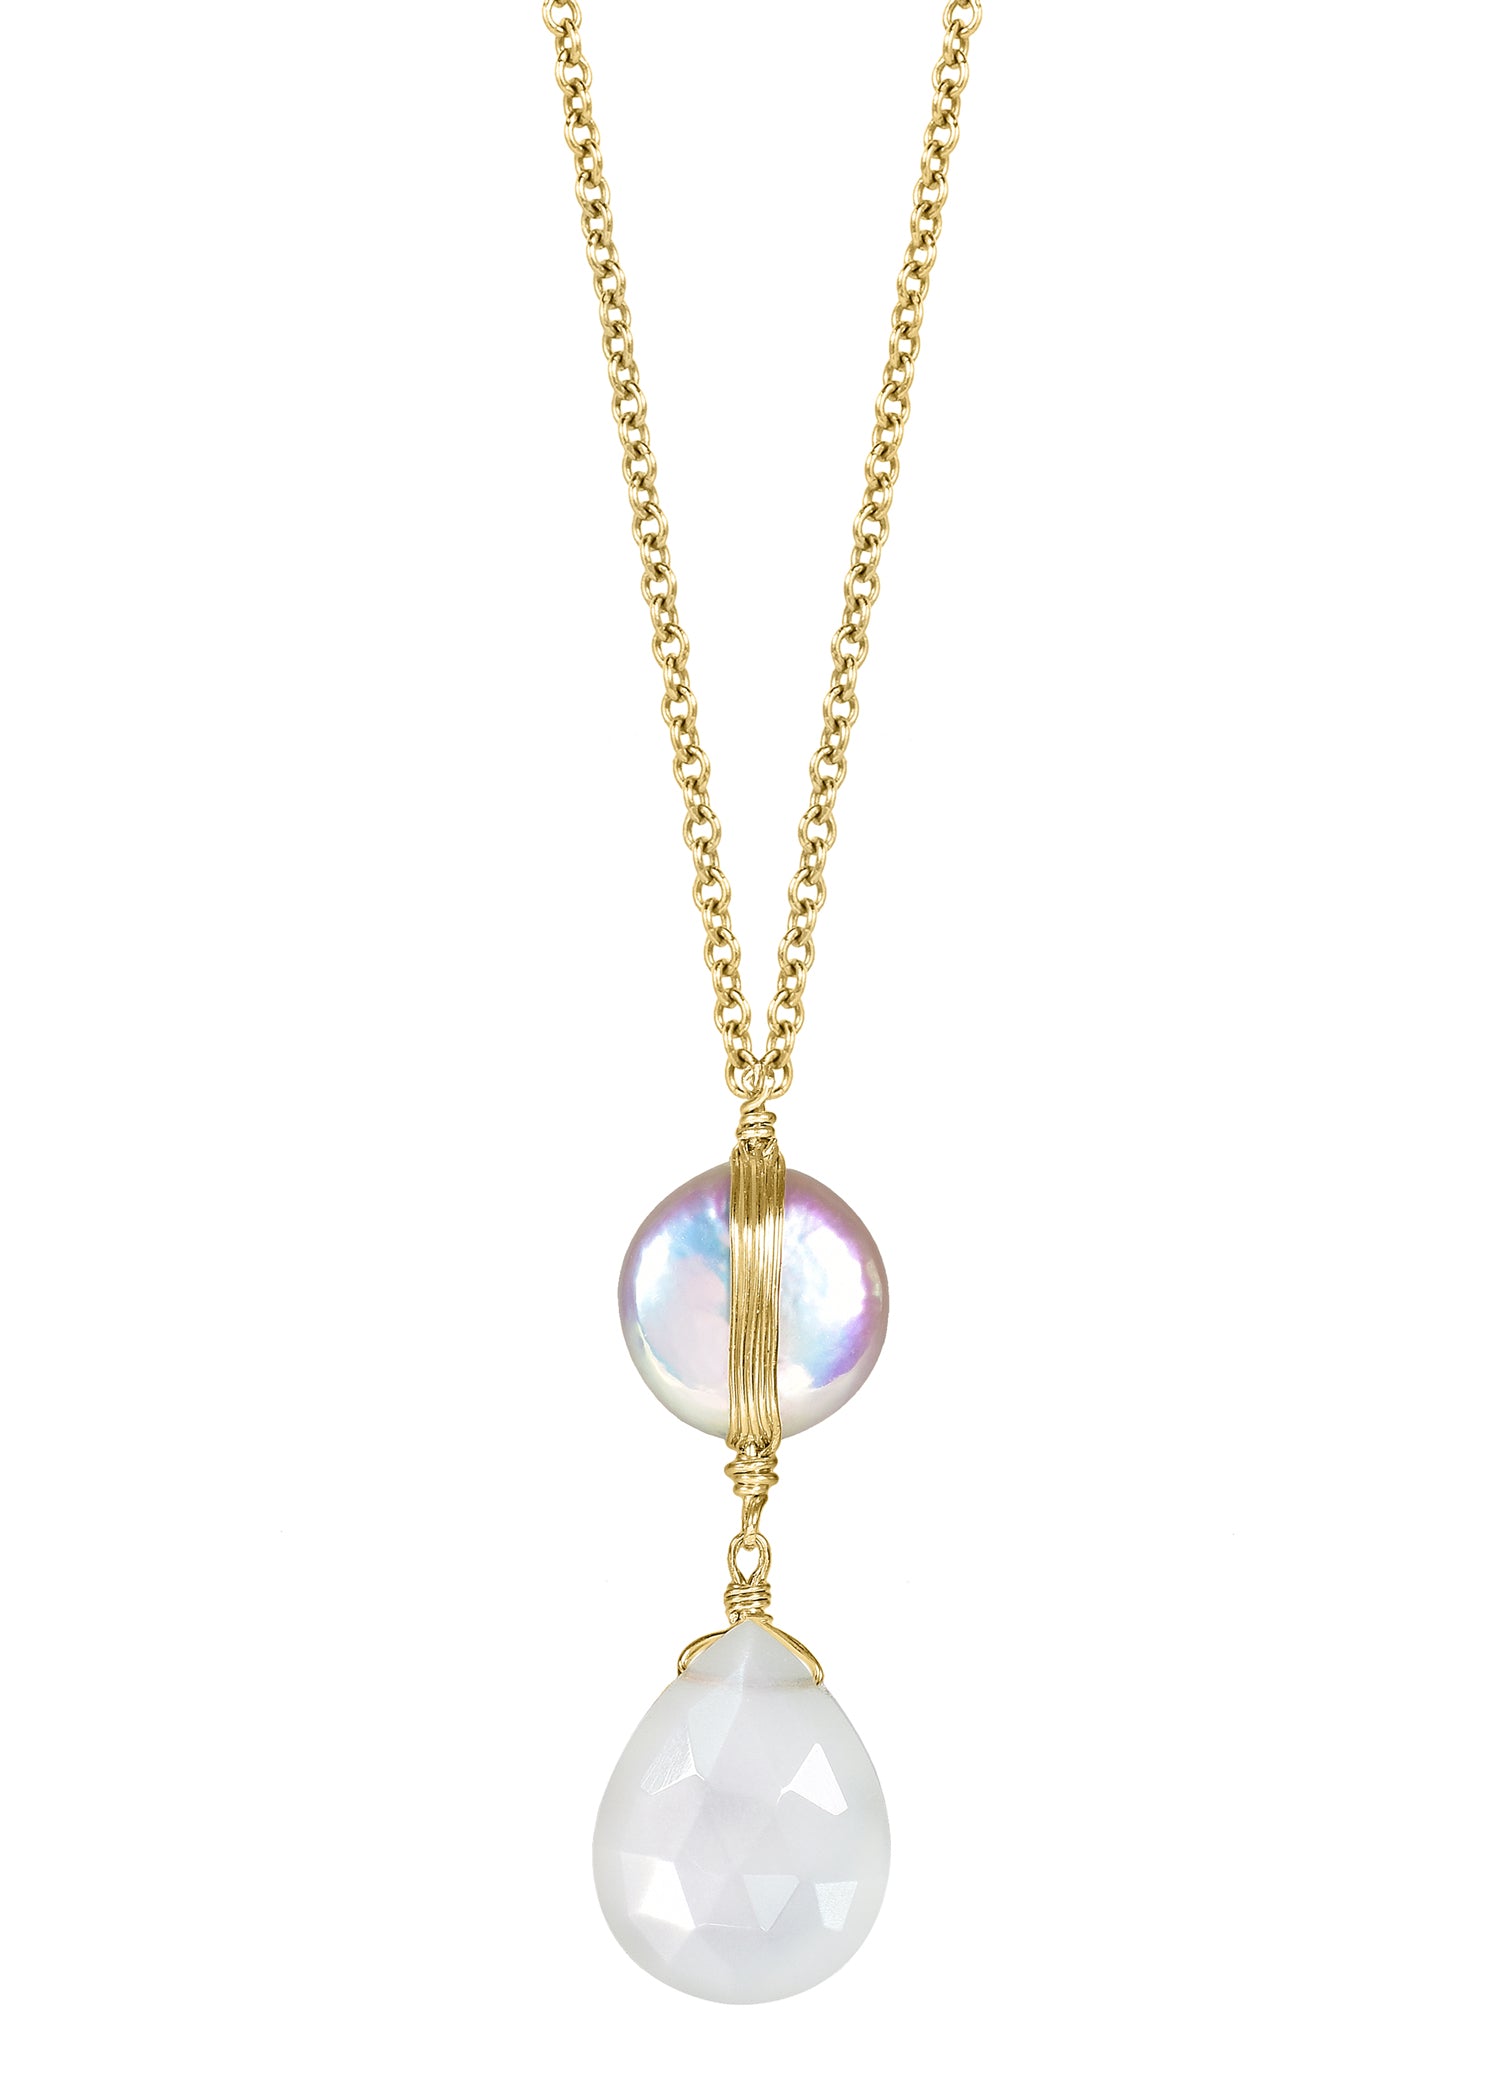 Freshwater pearl White moonstone 14k gold fill Necklace measures 16" in length Pendant measures 1-1/8" in length and 3/8" in width at the widest point Handmade in our Los Angeles studio